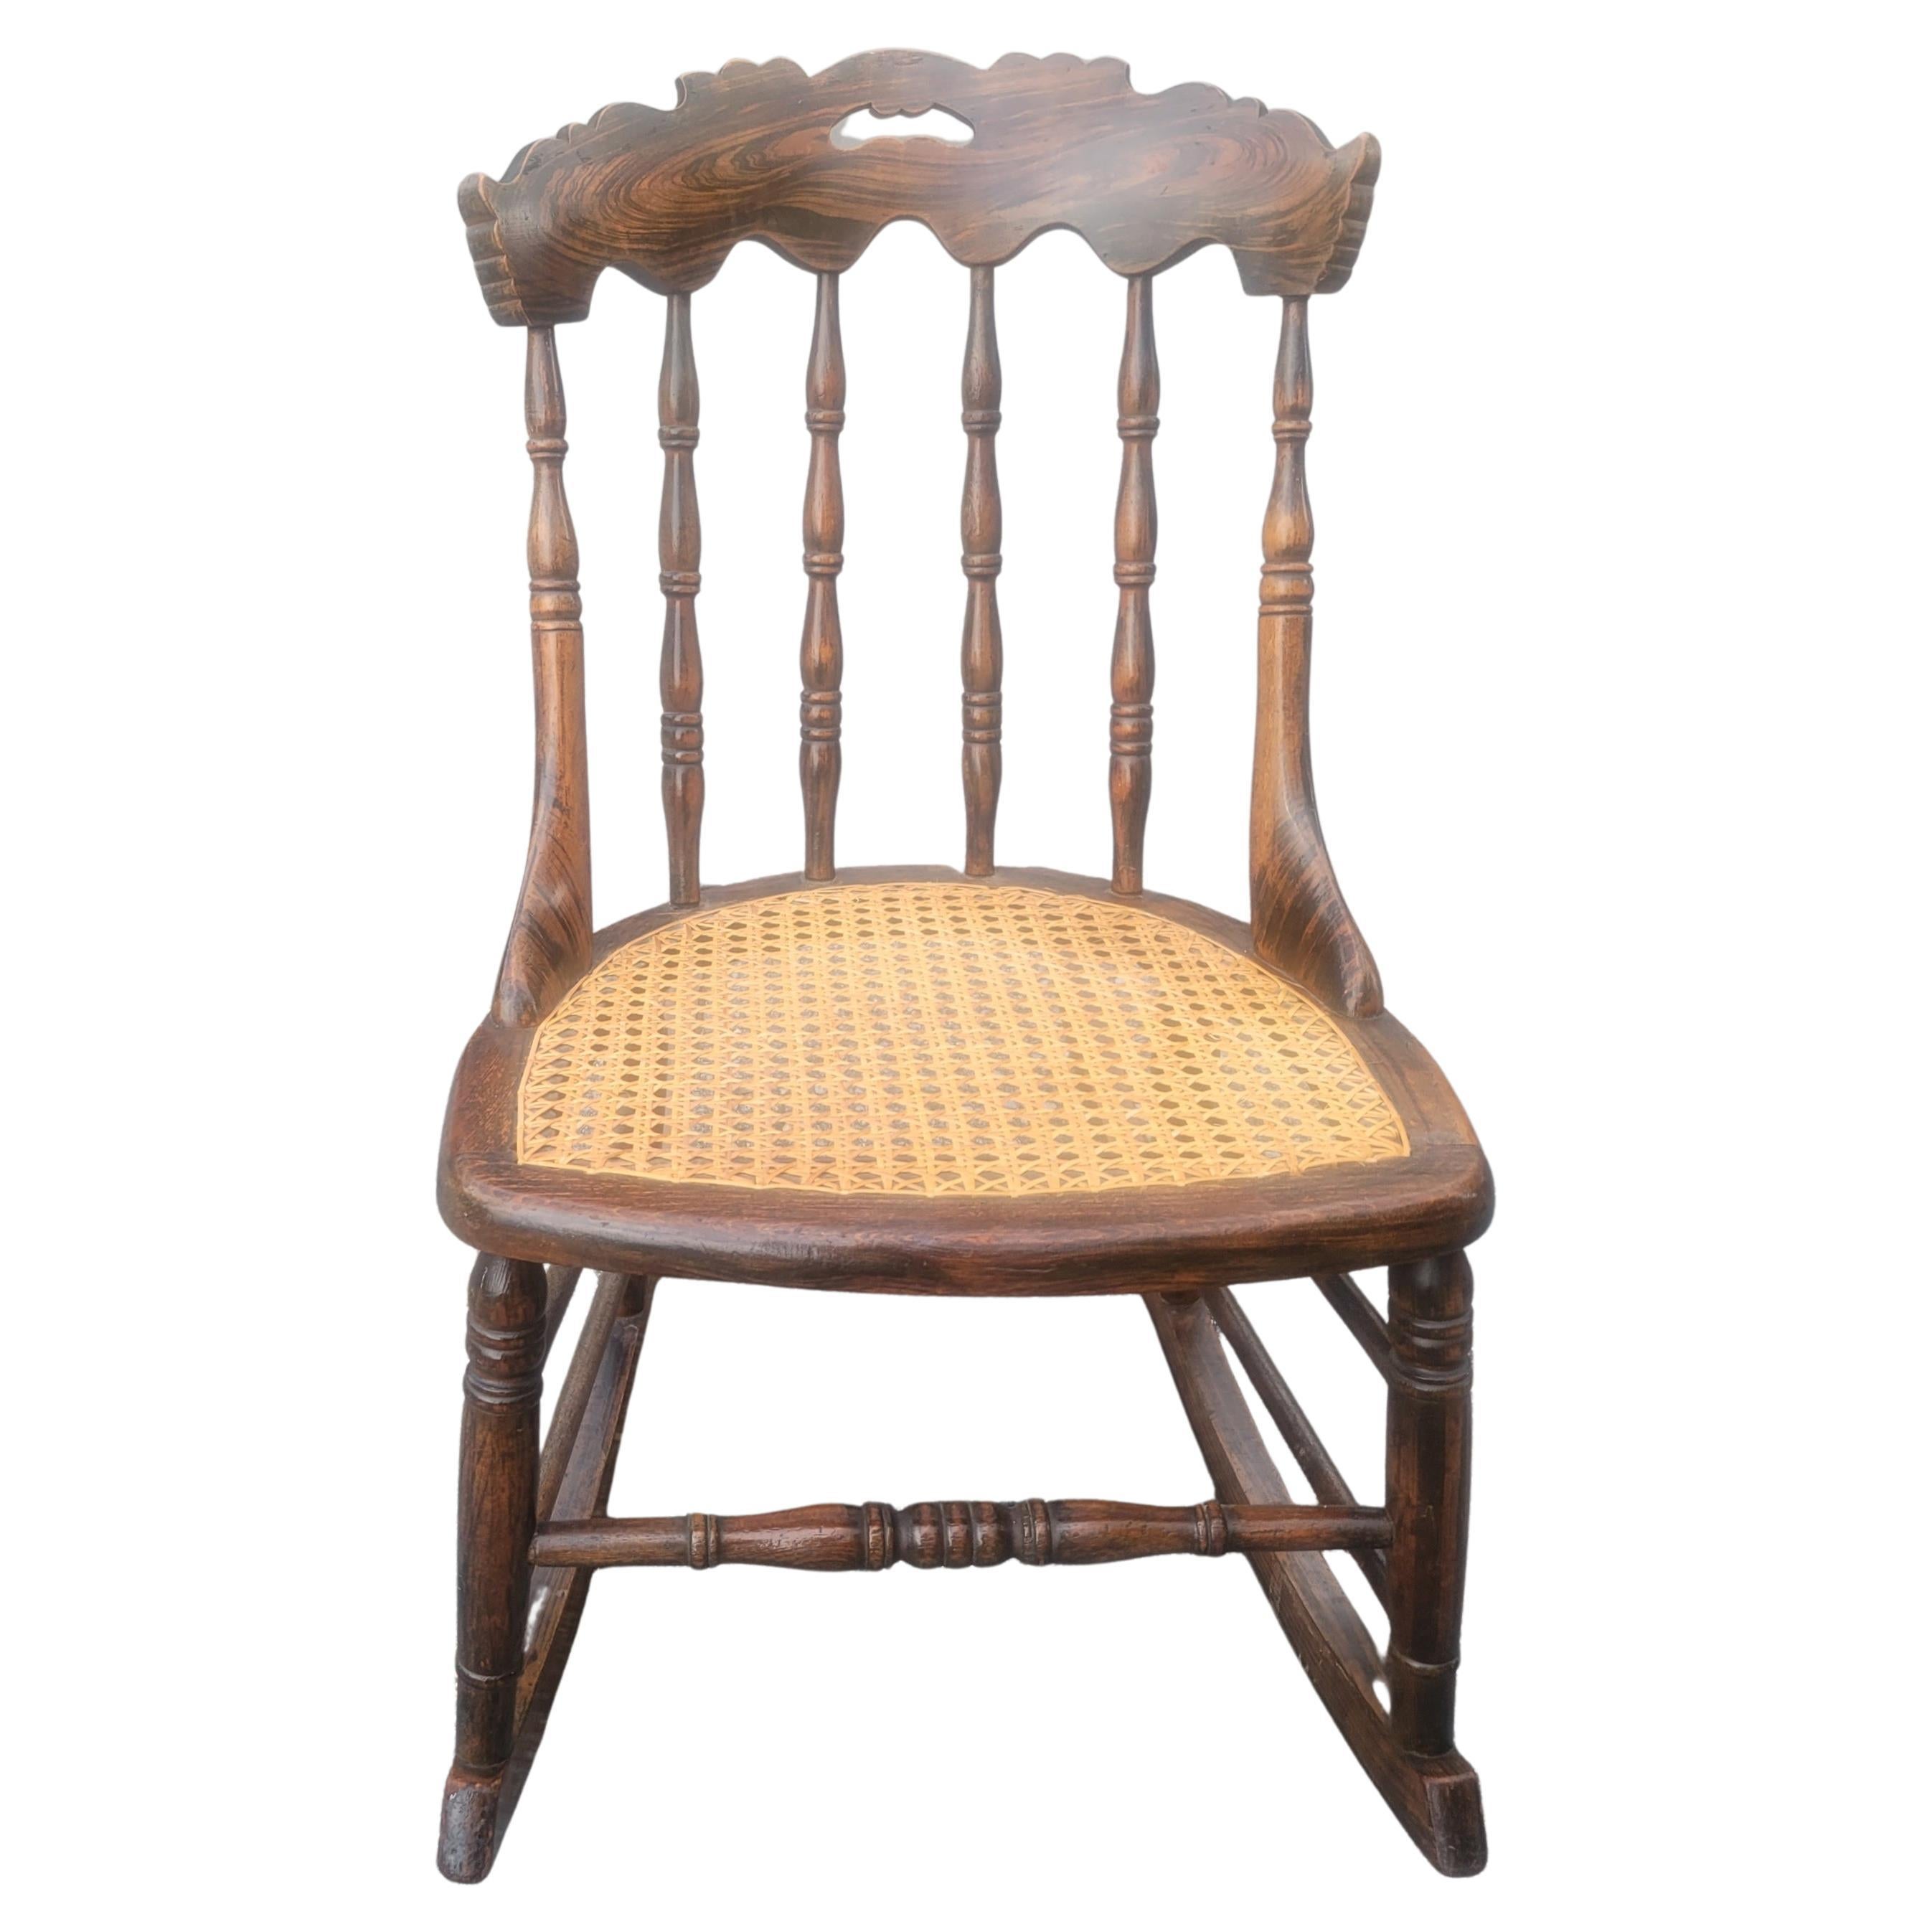 Vintage Medium Size Tiger Walnut and Cane Seat Rocking Chair For Sale